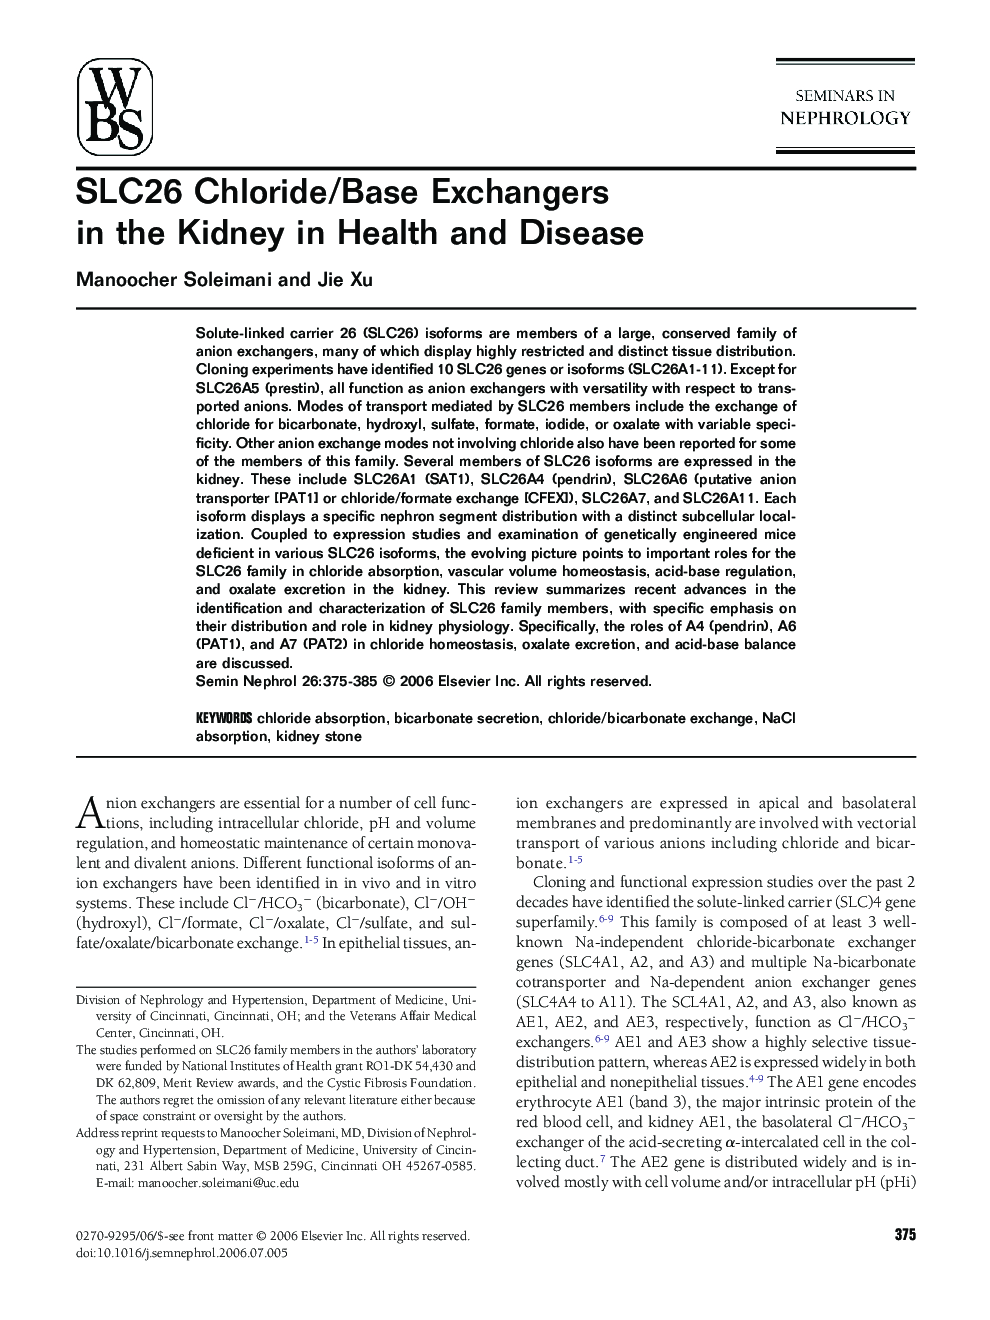 SLC26 Chloride/Base Exchangers in the Kidney in Health and Disease